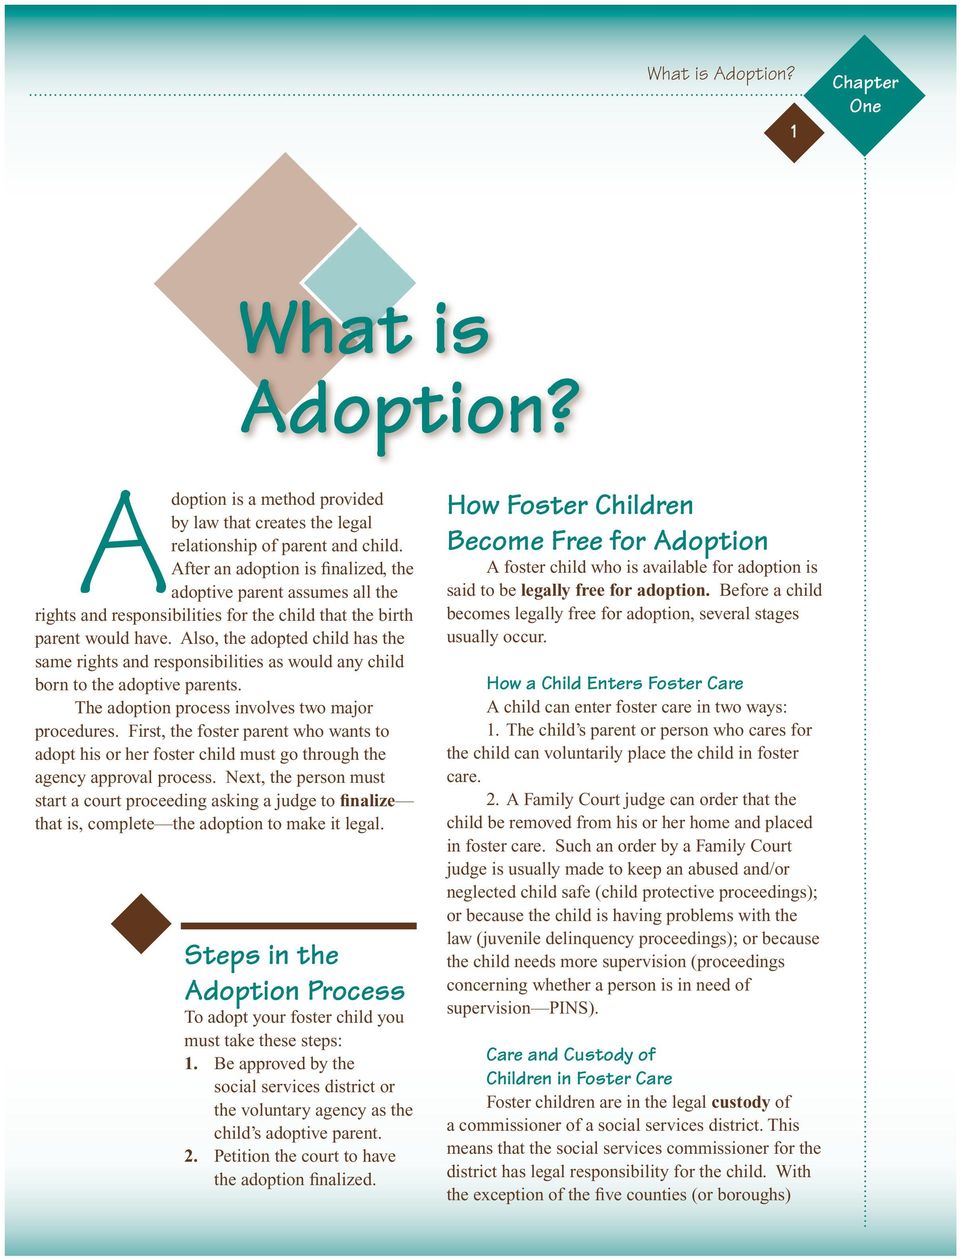 Also, the adopted child has the same rights and responsibilities as would any child born to the adoptive parents. The adoption process involves two major procedures.